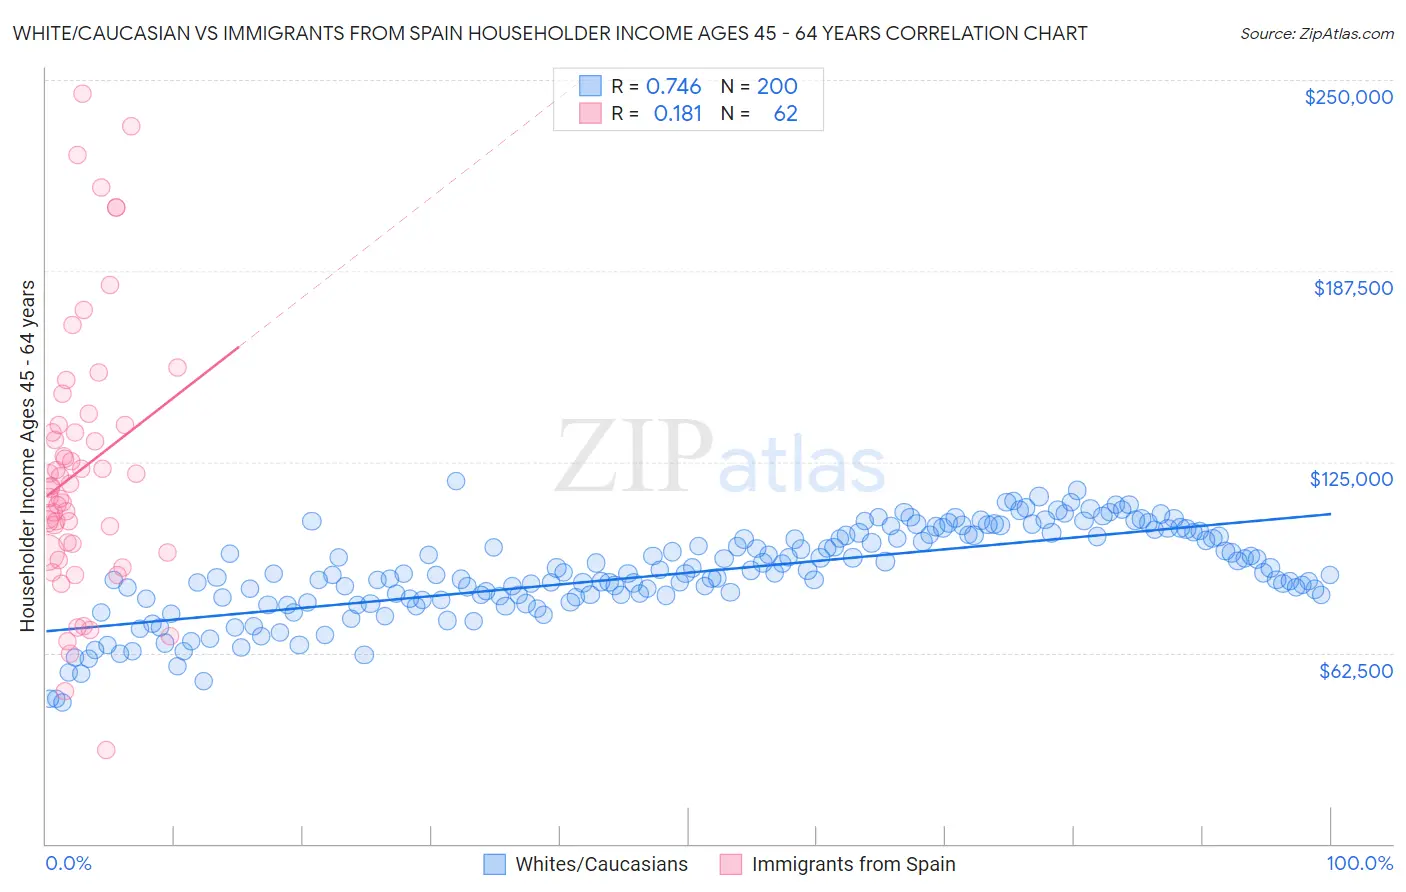 White/Caucasian vs Immigrants from Spain Householder Income Ages 45 - 64 years